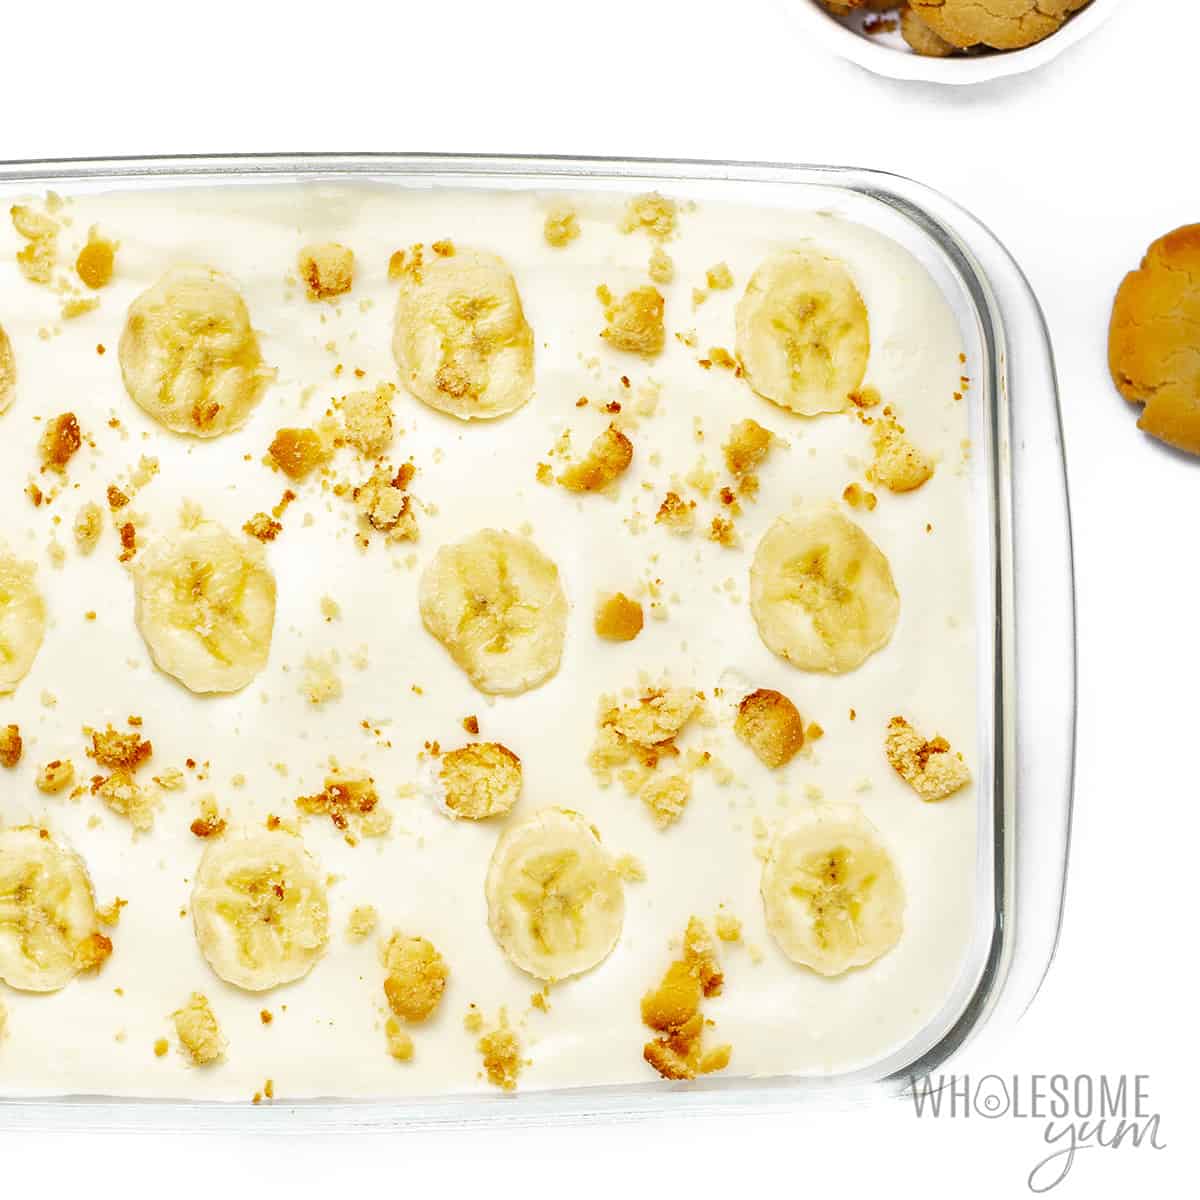 Fully assembled sugar-free banana pudding with slices of banana and cookie crumbs on top..